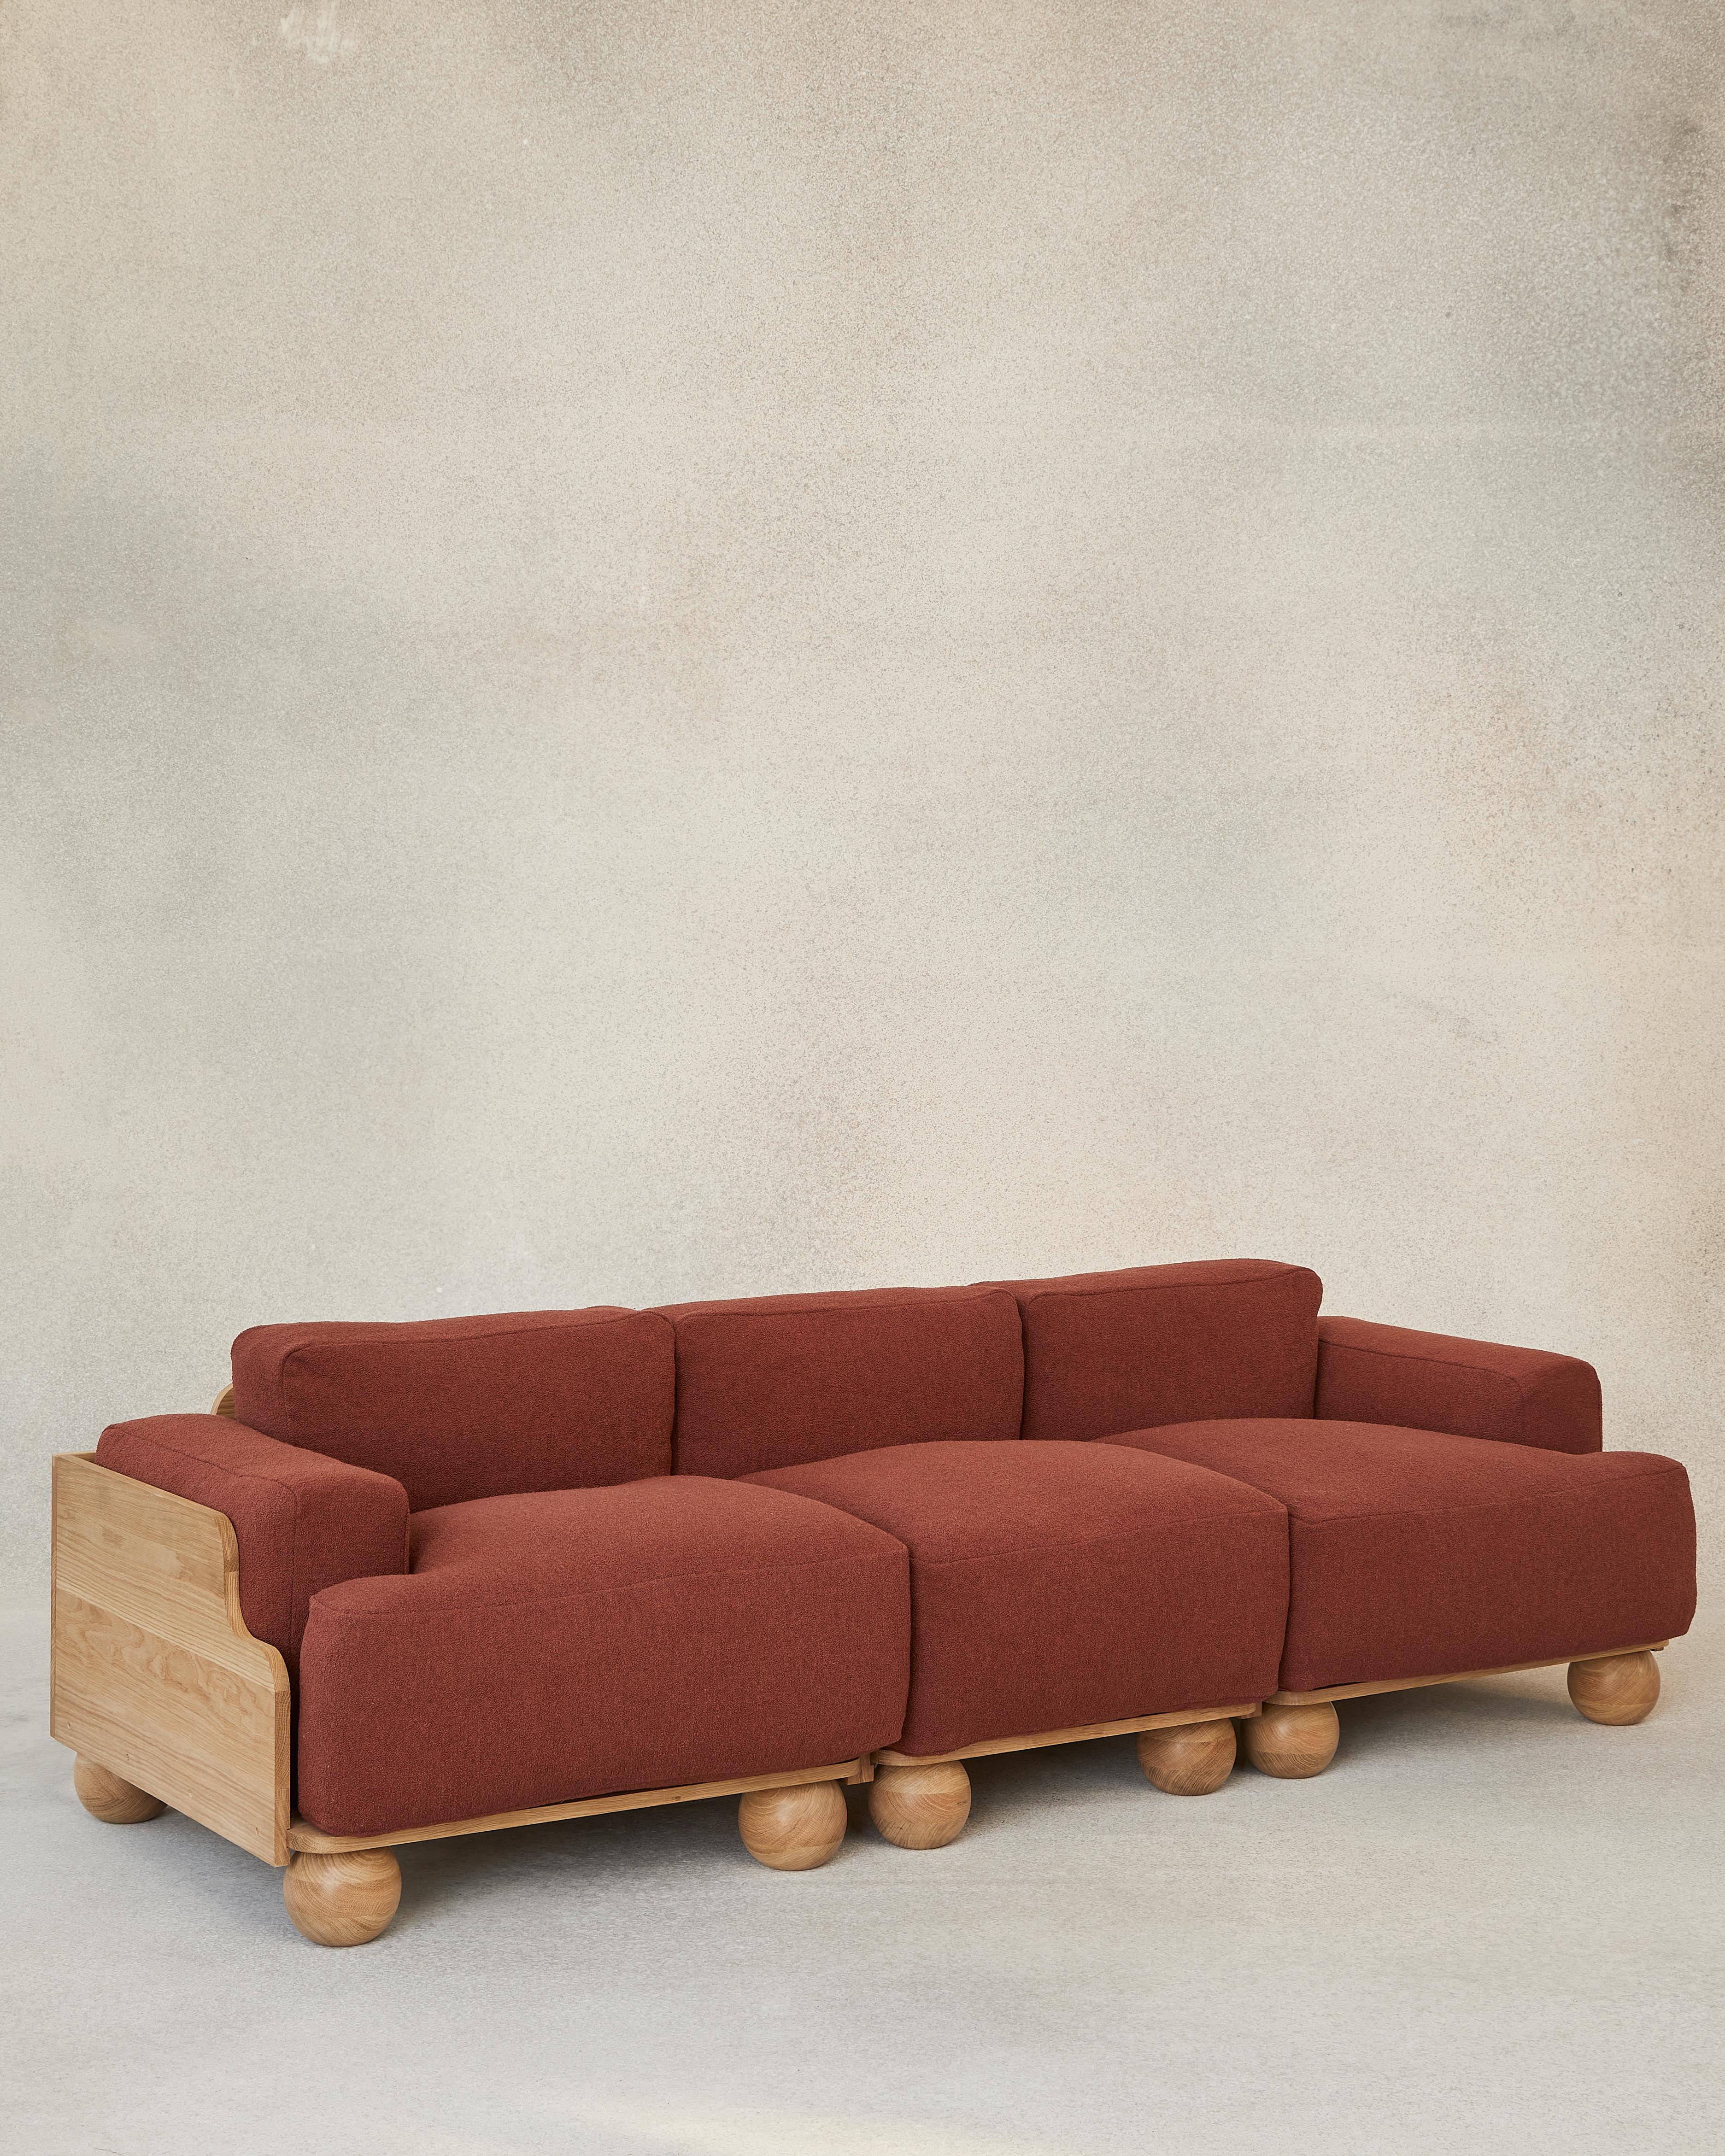 The Cove Sofa’s adapts to any interior environment and beckons to be sat in all day. The modular design allows versatile combinations and lengths of two-, three- or more seaters with or without arms. 

Expanses of sculptural solid oak encase the